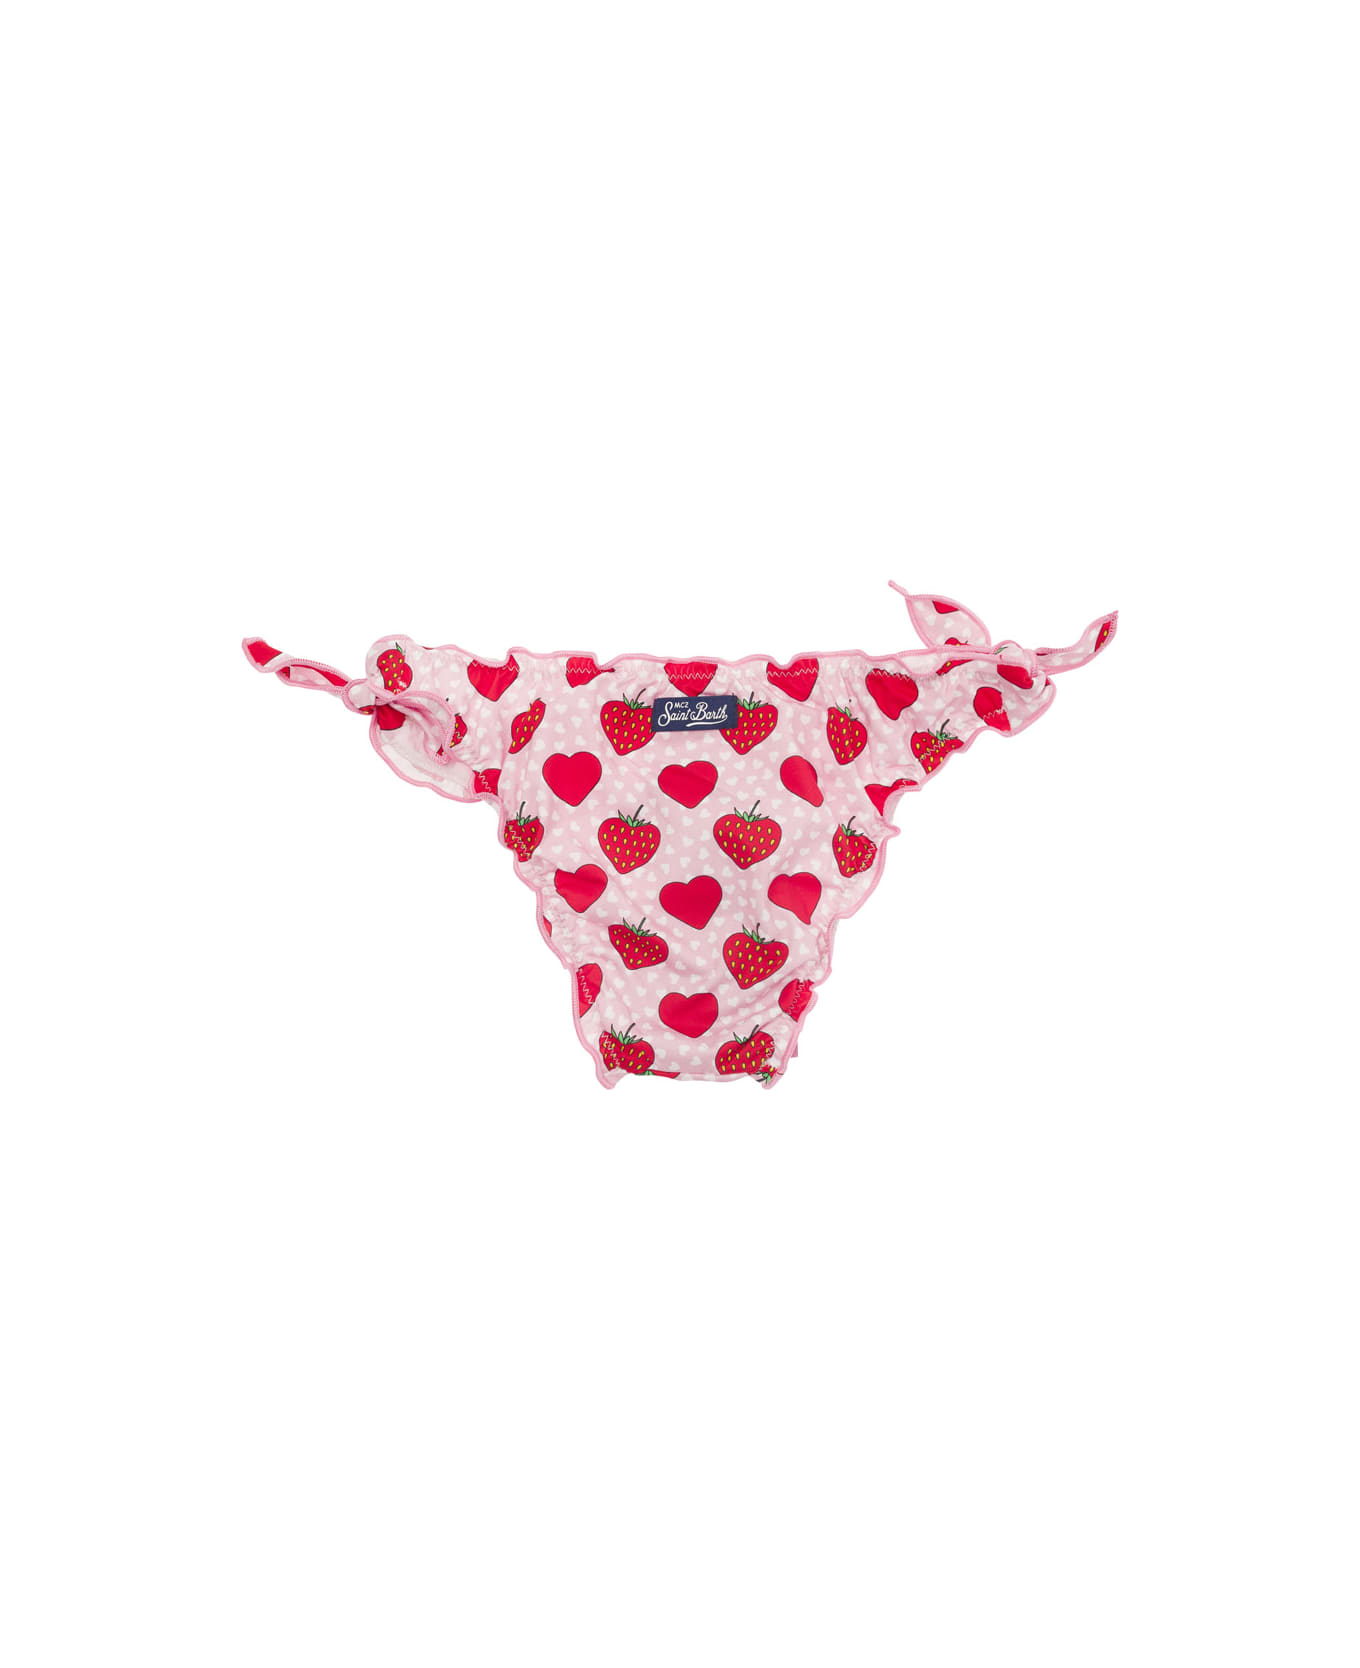 MC2 Saint Barth Pink And Red Bikini Bottom With Strawberry Print In Stretch Fabric Baby - Multicolor 水着